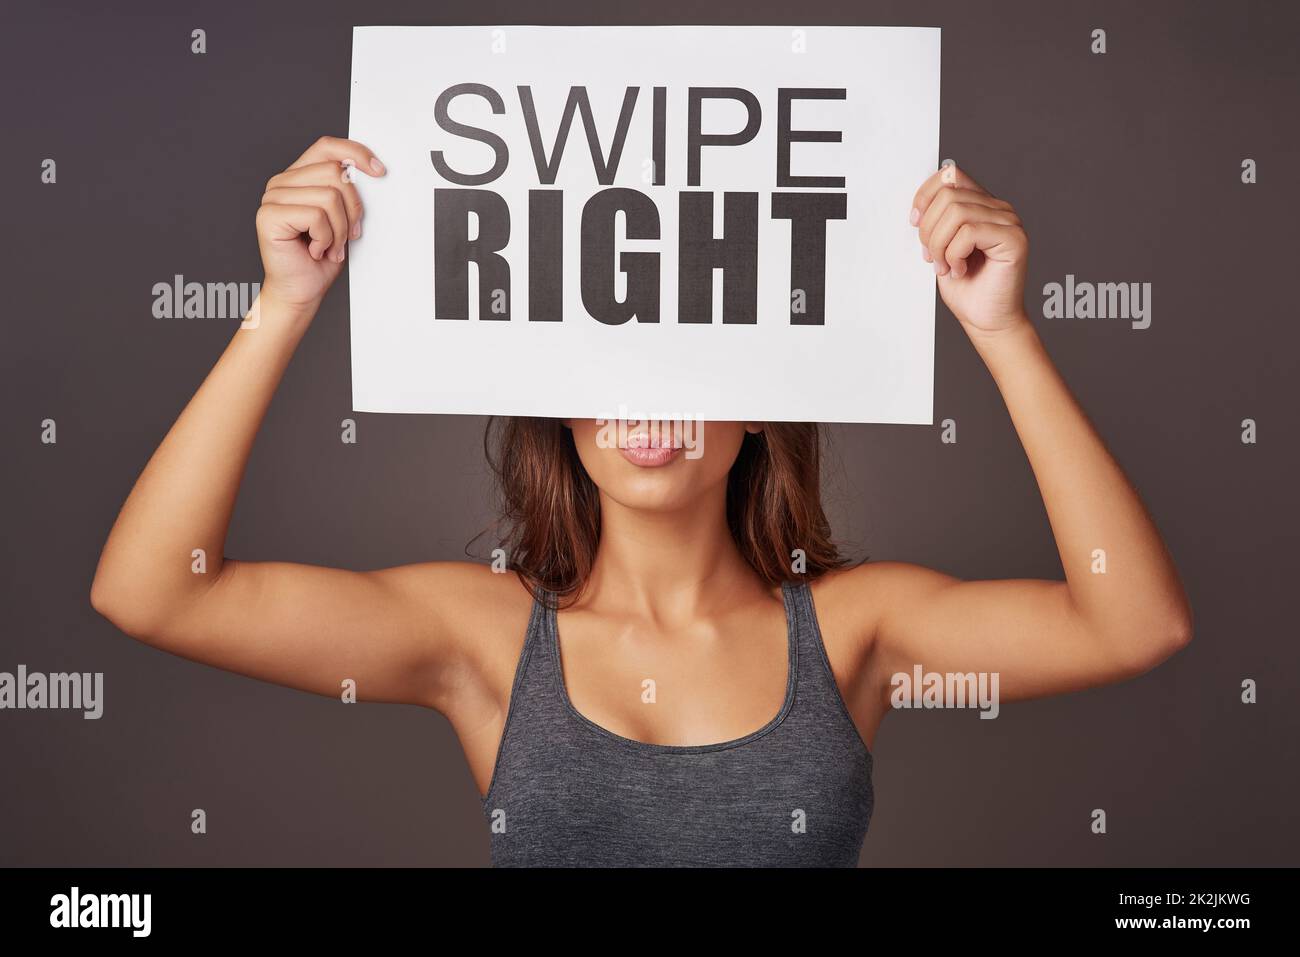 It could be love at first swipe. Studio shot of a young woman holding a sign with swipe right printed on it against a gray background. Stock Photo